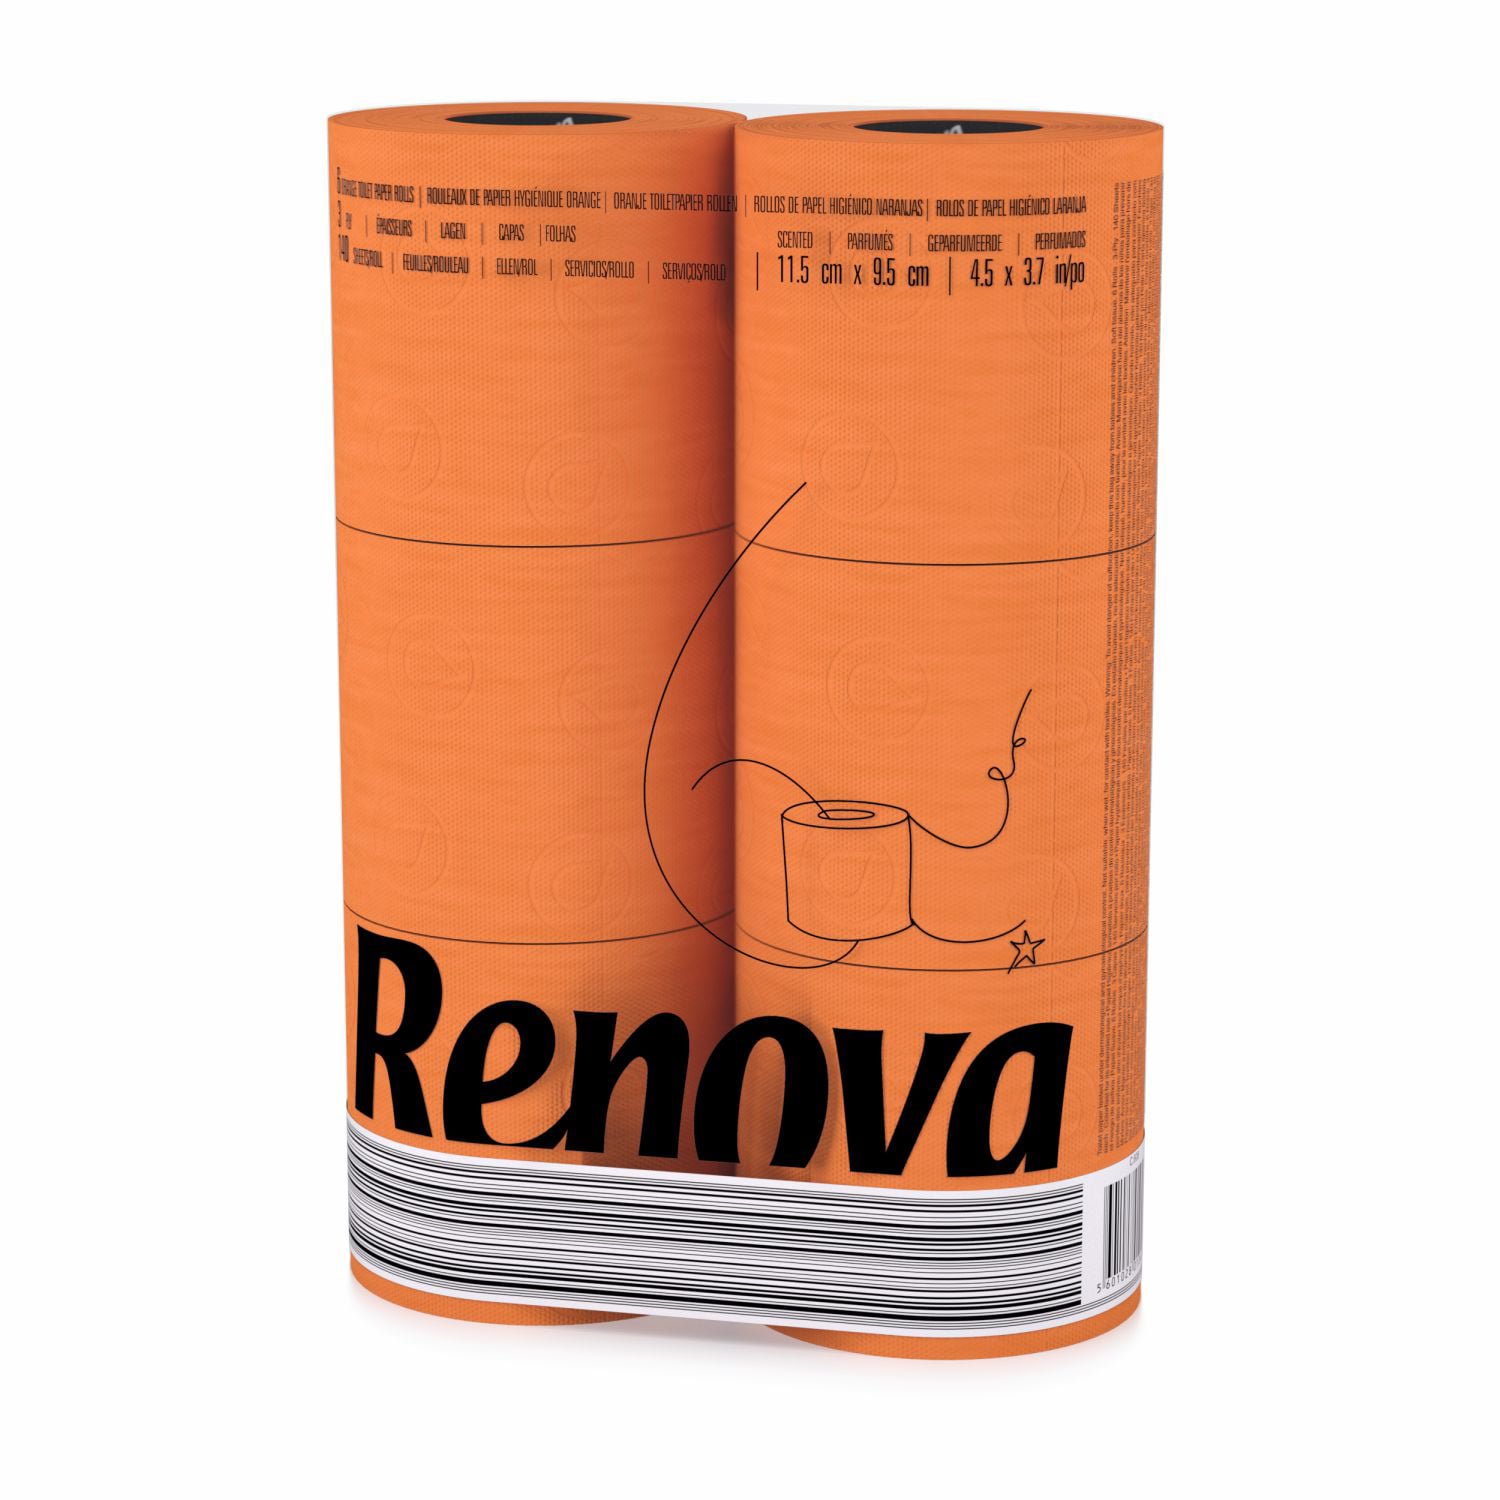 Details about   Renova Luxury Scented Colored Toilet Paper 6 Rolls 3-Ply 140 Sheets Bath Tissue 